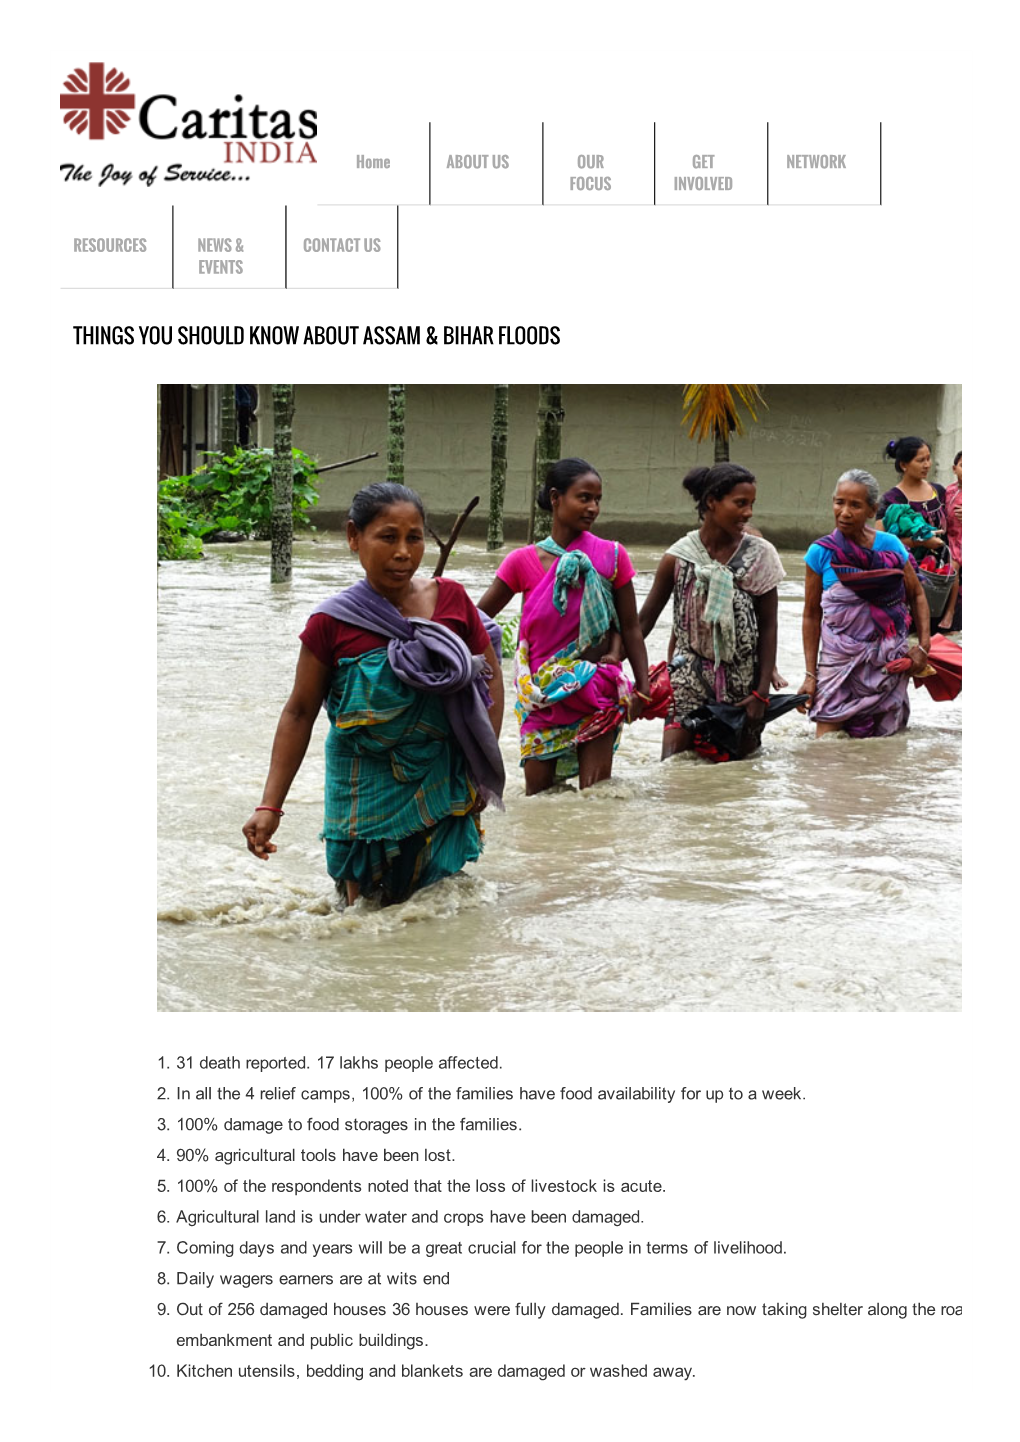 Things You Should Know About Assam & Bihar Floods